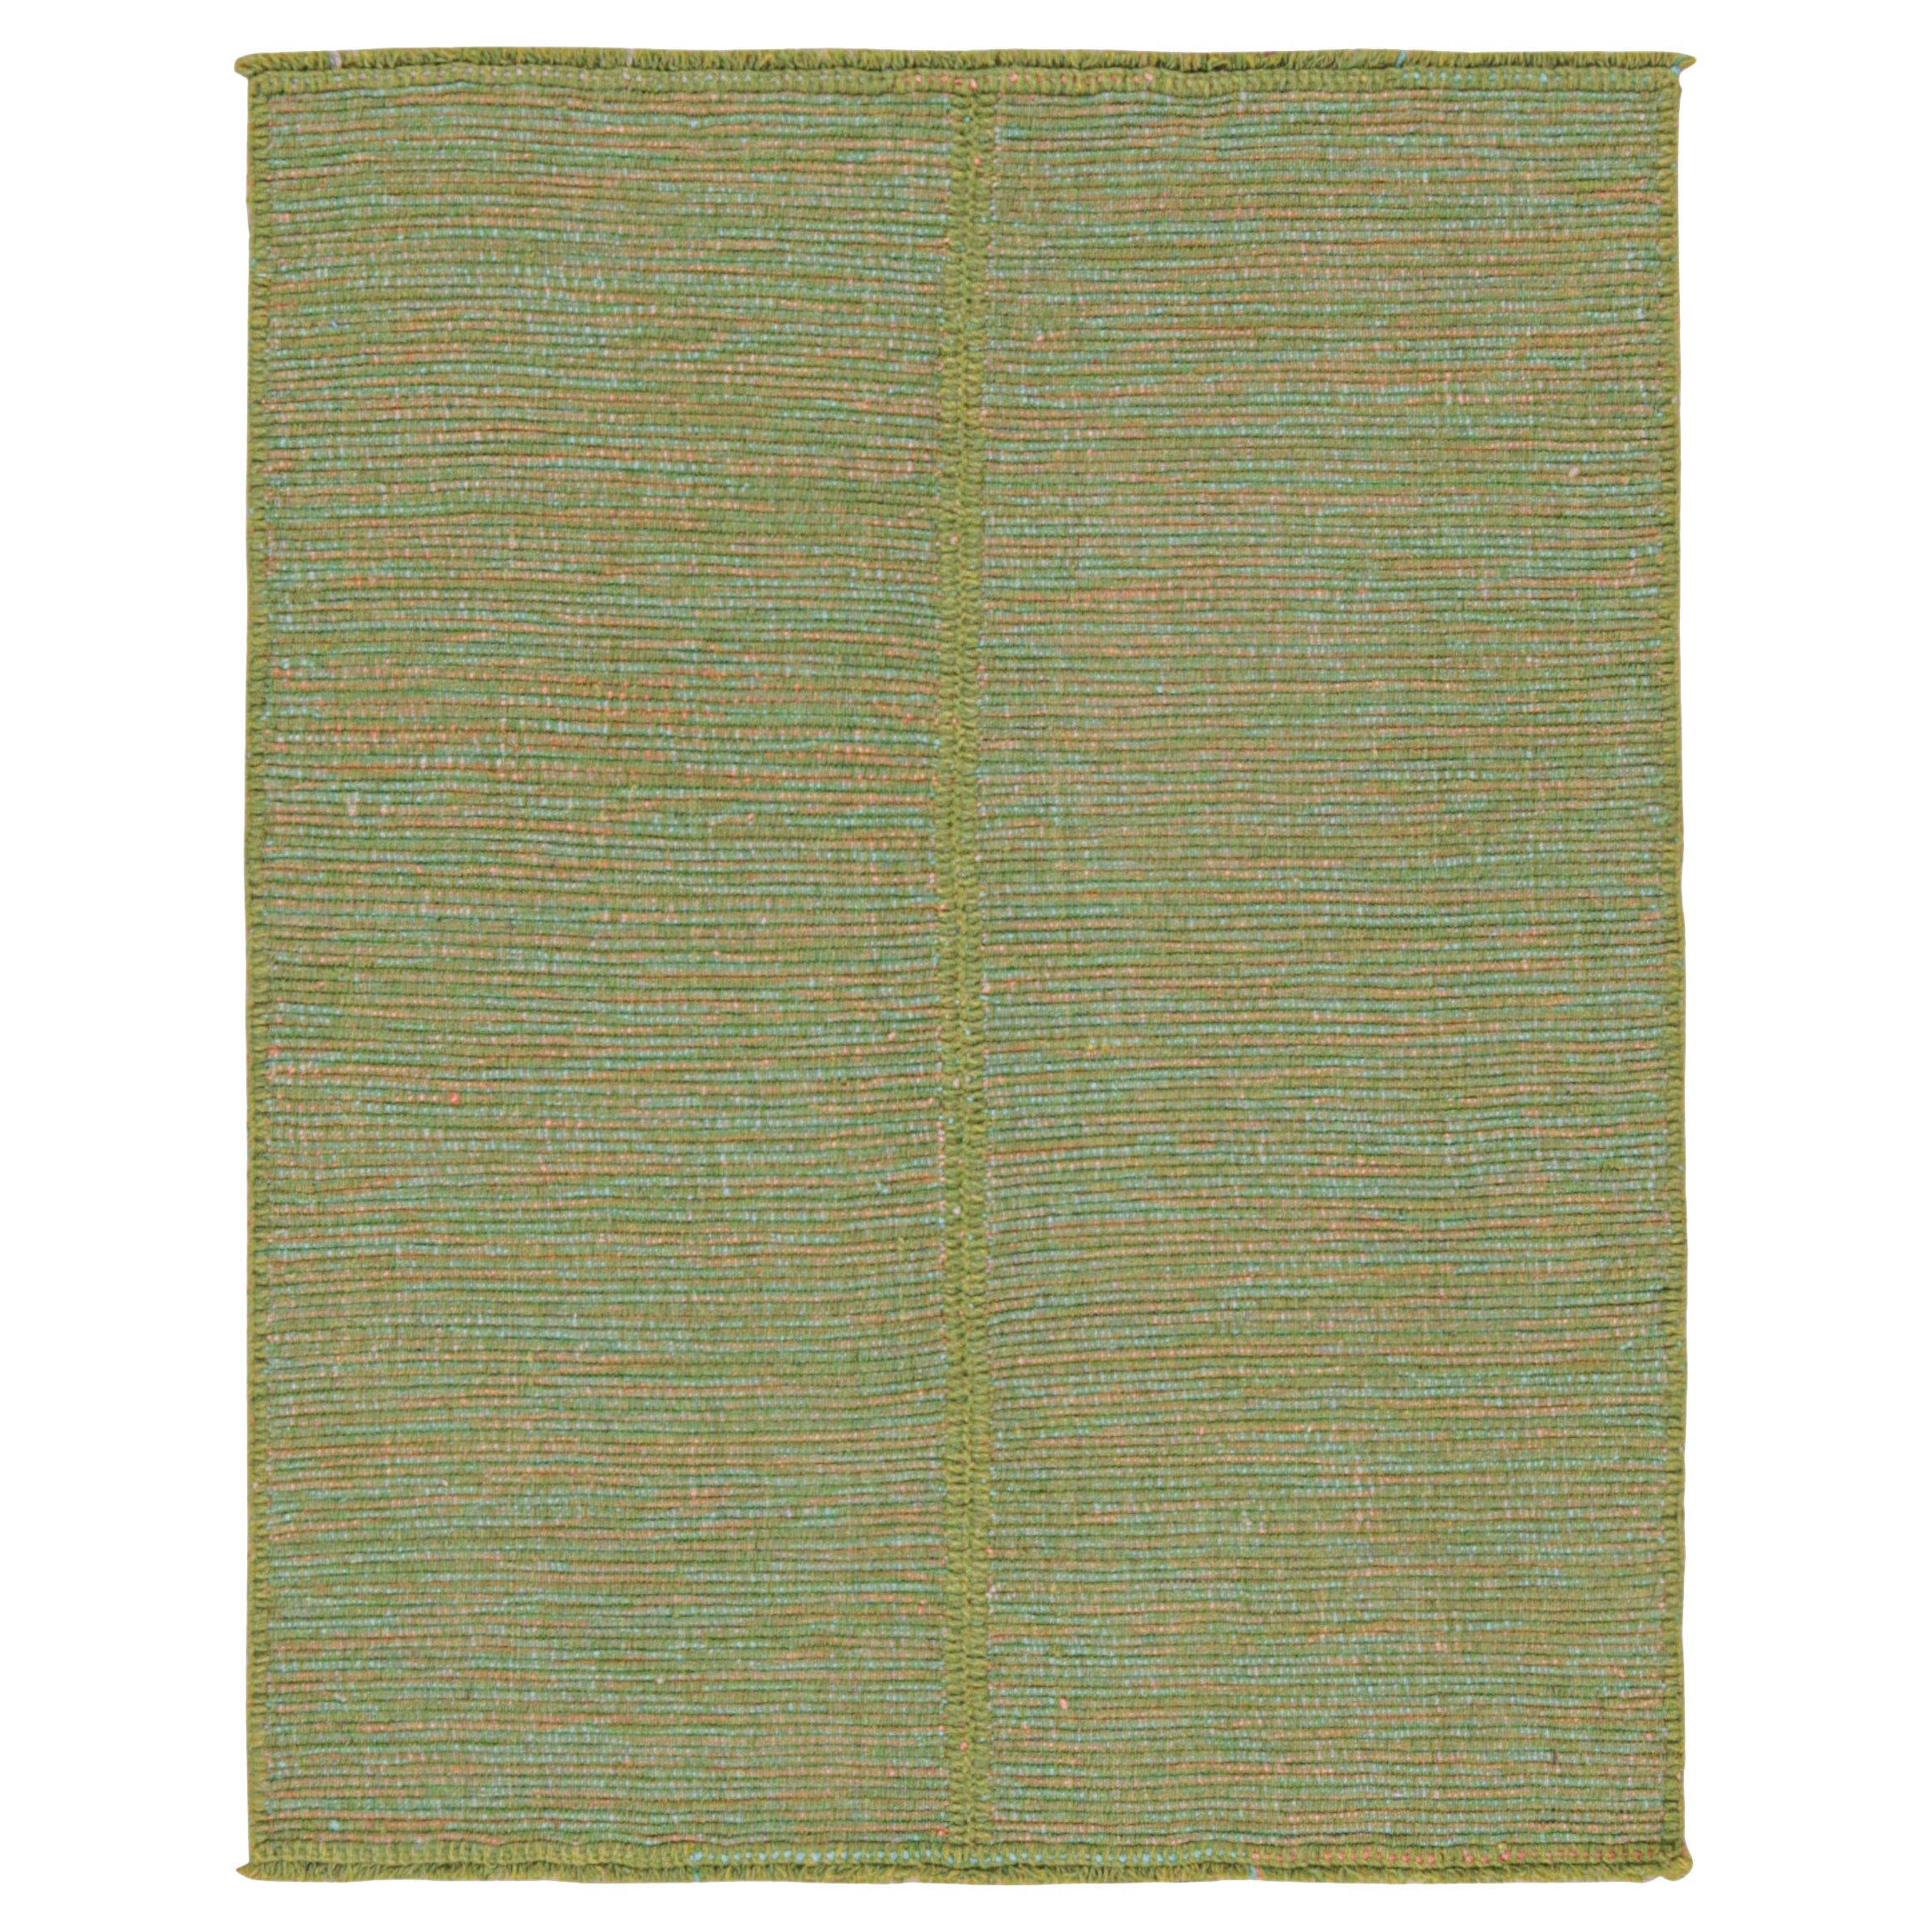 Rug & Kilim’s Contemporary Kilim Rug in Green with Teal and Pink Accents